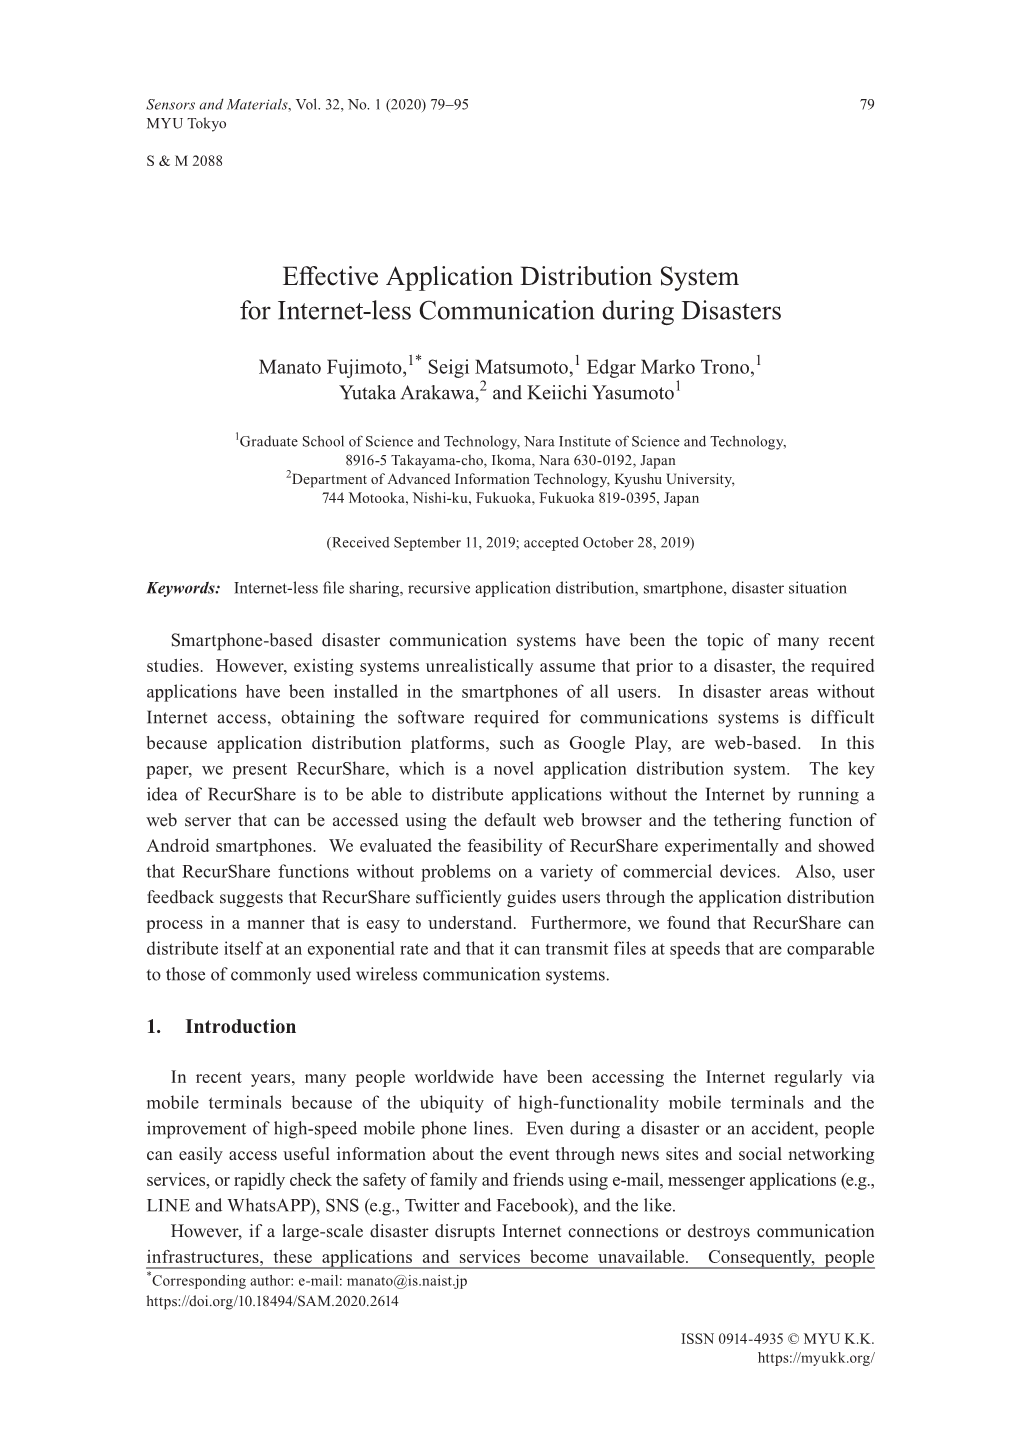 Effective Application Distribution System for Internet-Less Communication During Disasters